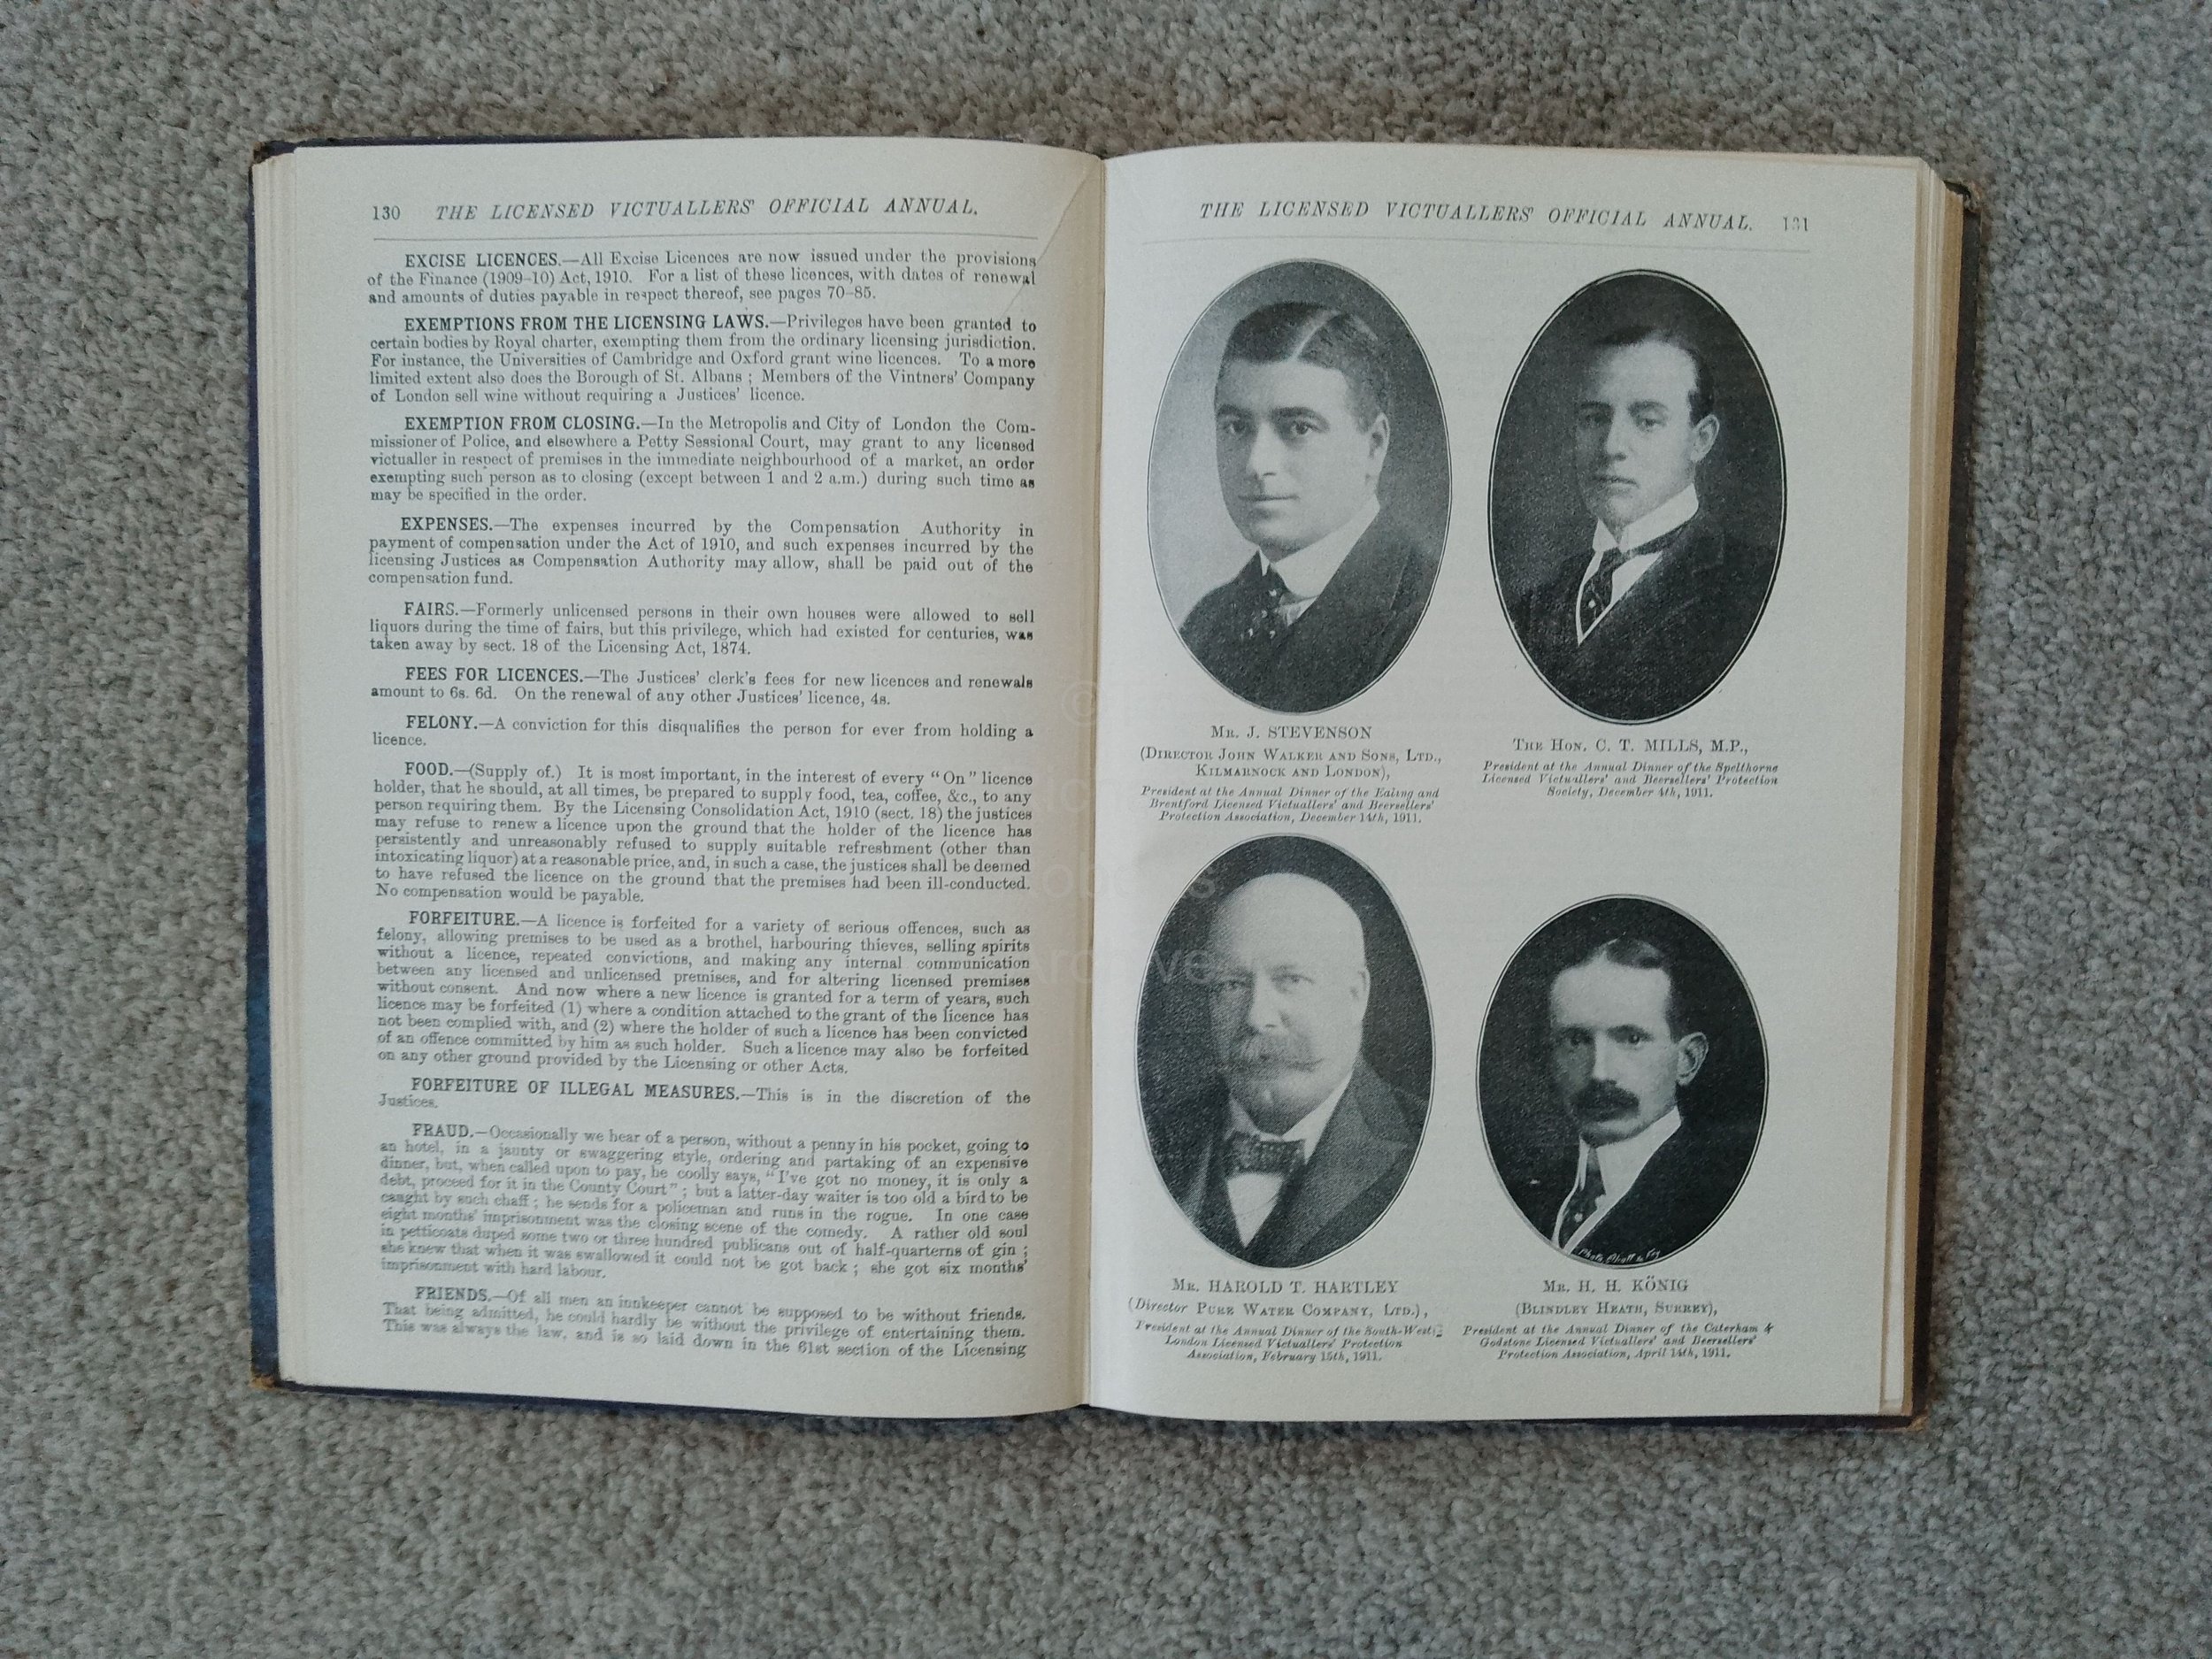 Licensed Victuallers Annual 1912 - 3w.jpg